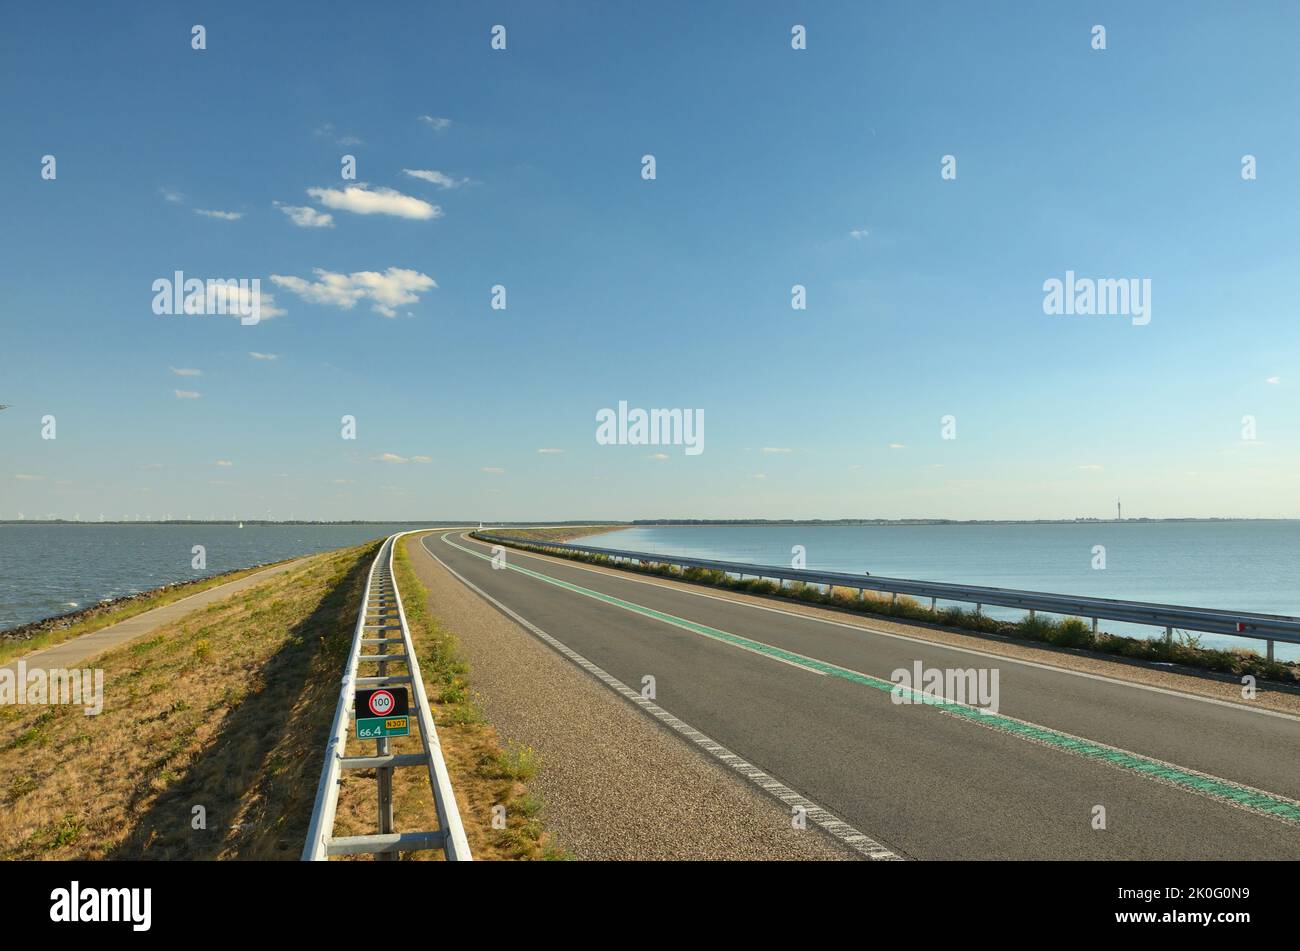 The Houtribdijk crossing, a 27km long causeway and flood defence between Lelystad and Enkhuizen, Netherlands Stock Photo